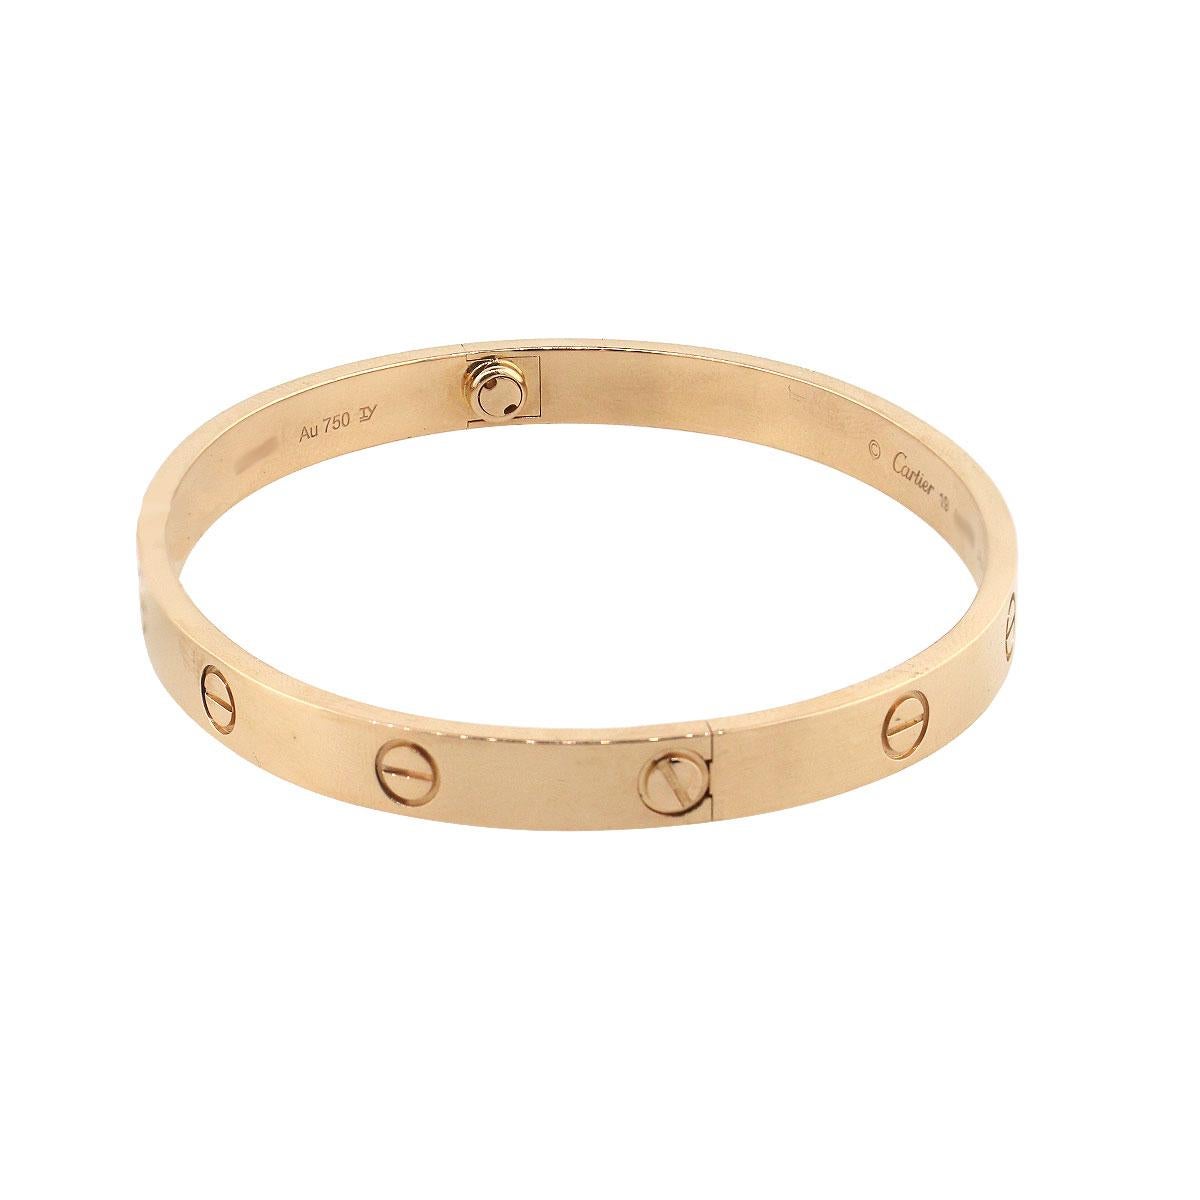 Designer: Cartier
Material: 18k Rose Gold
Style: New Style Love Bangle
Bangle Size: Cartier size 20
Total Weight: 35.8g (23dwt)
Additional Details: This item includes Cartier papers and Cartier screwdriver!
SKU: G9582